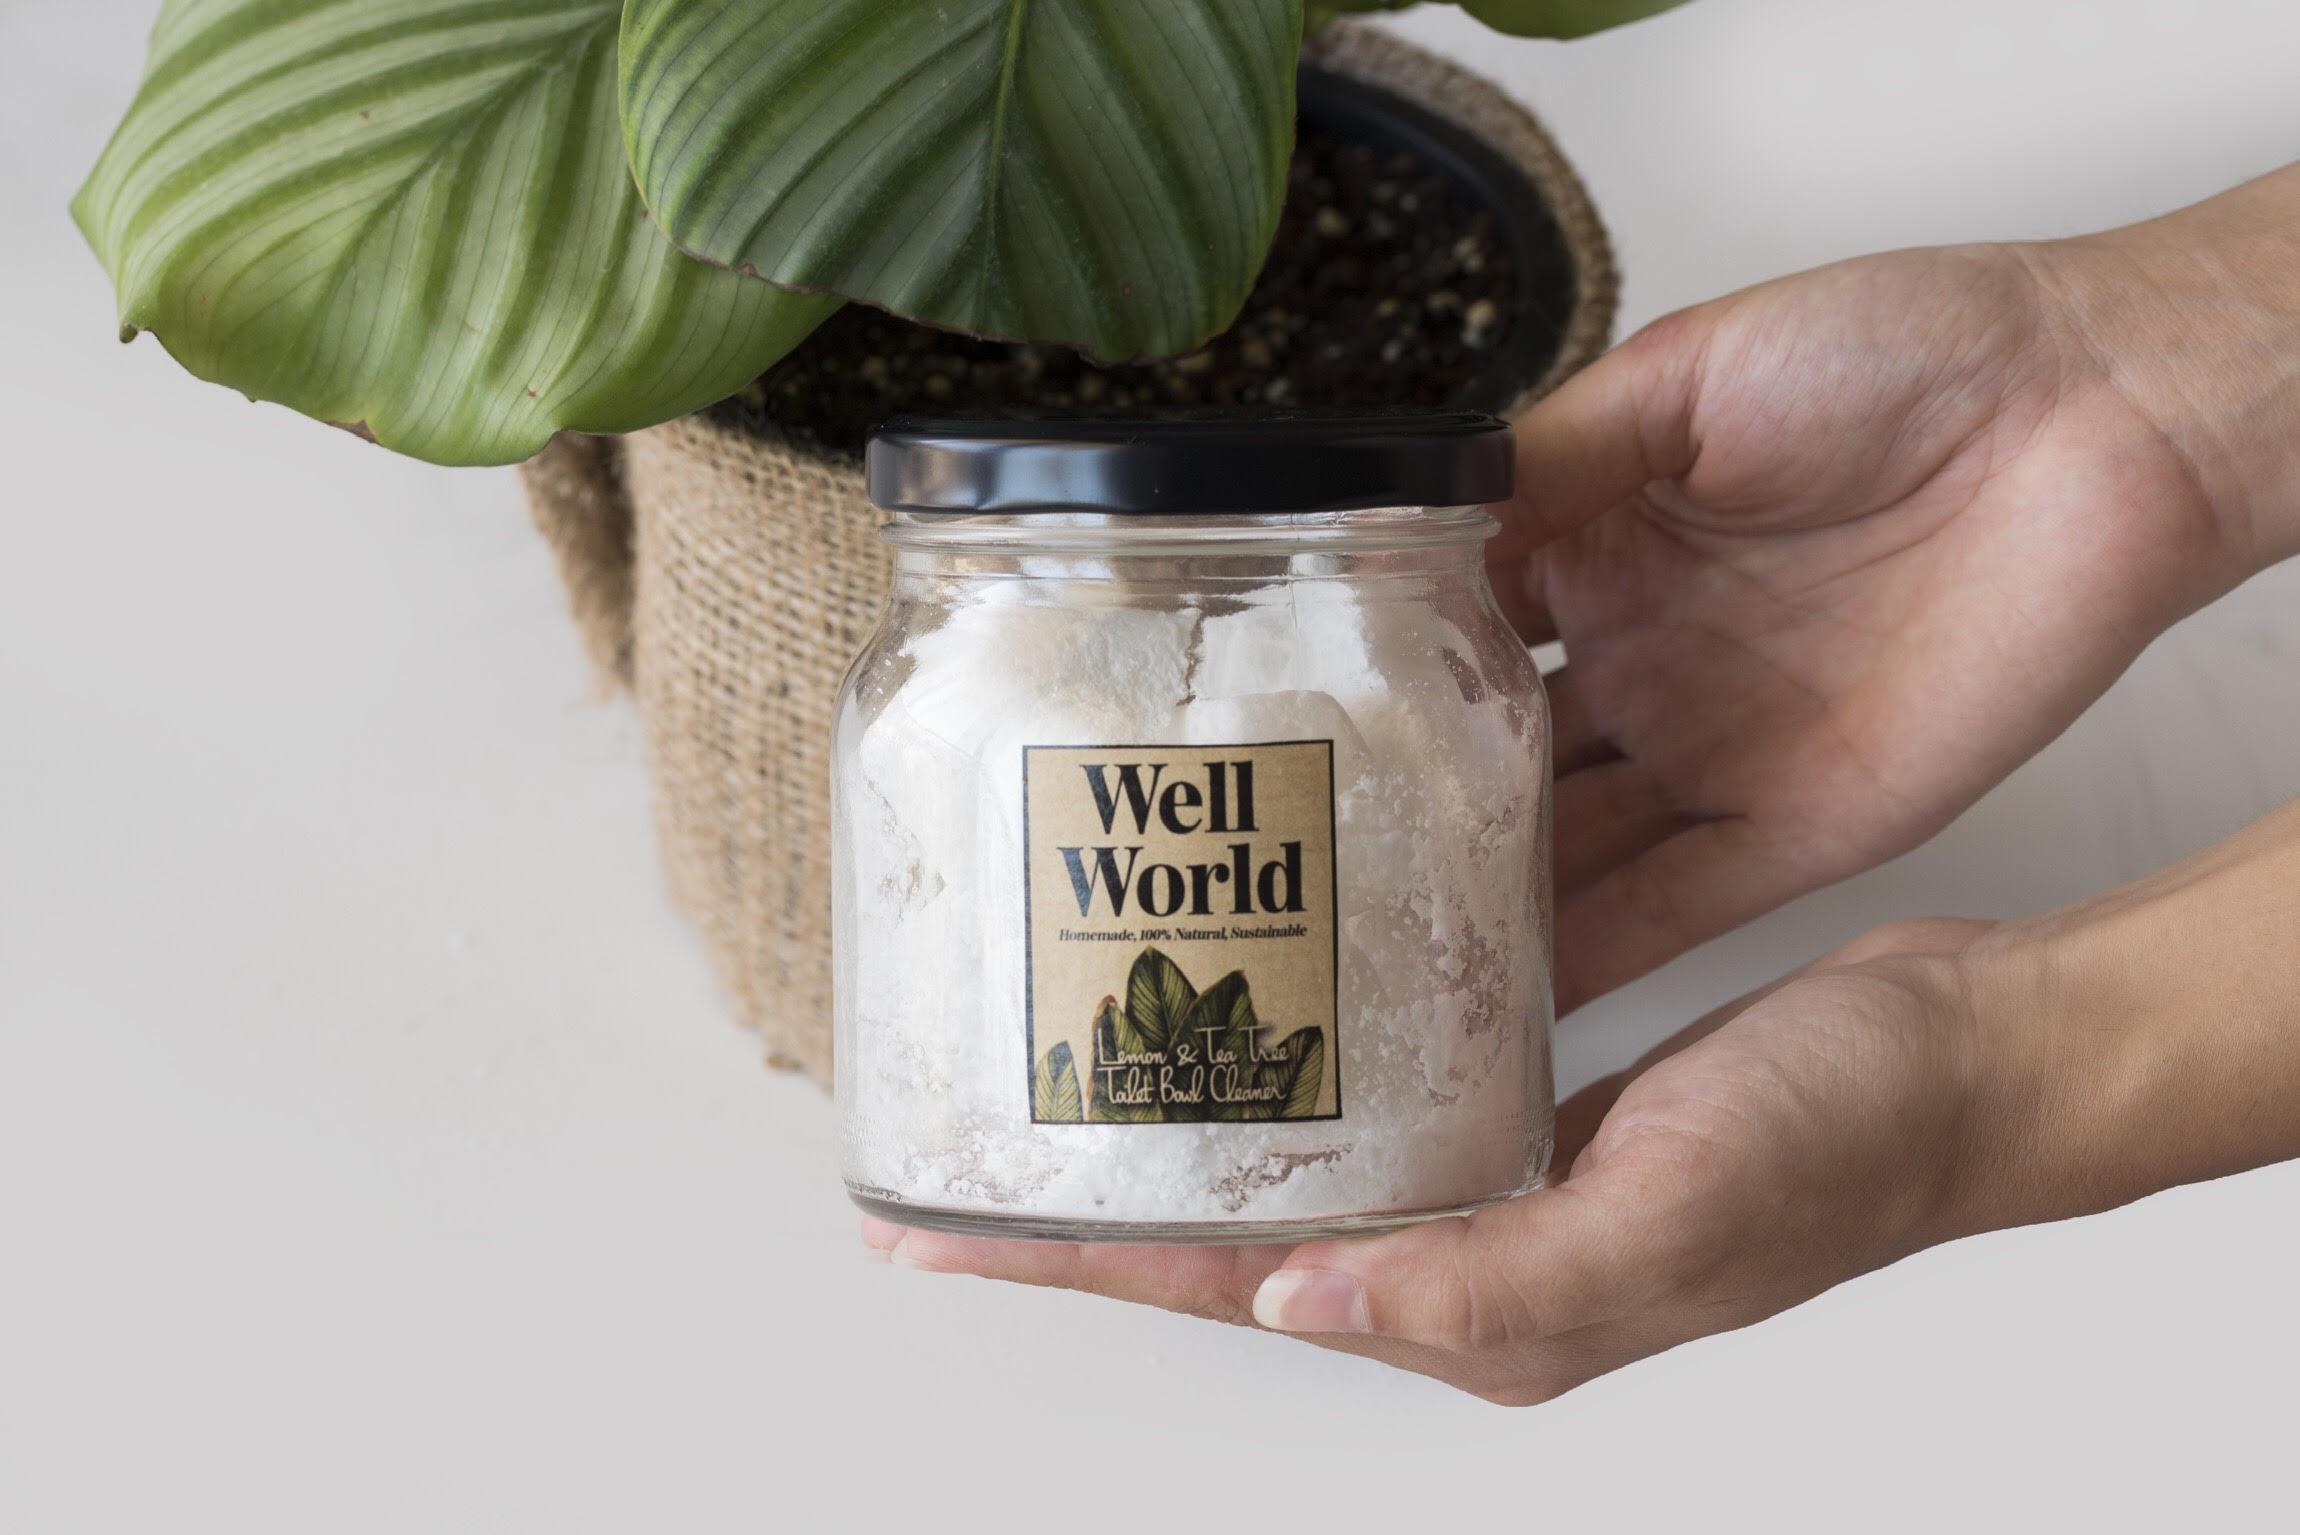 Local Brand Well World Makes Sustainable All-Natural Homecare Products